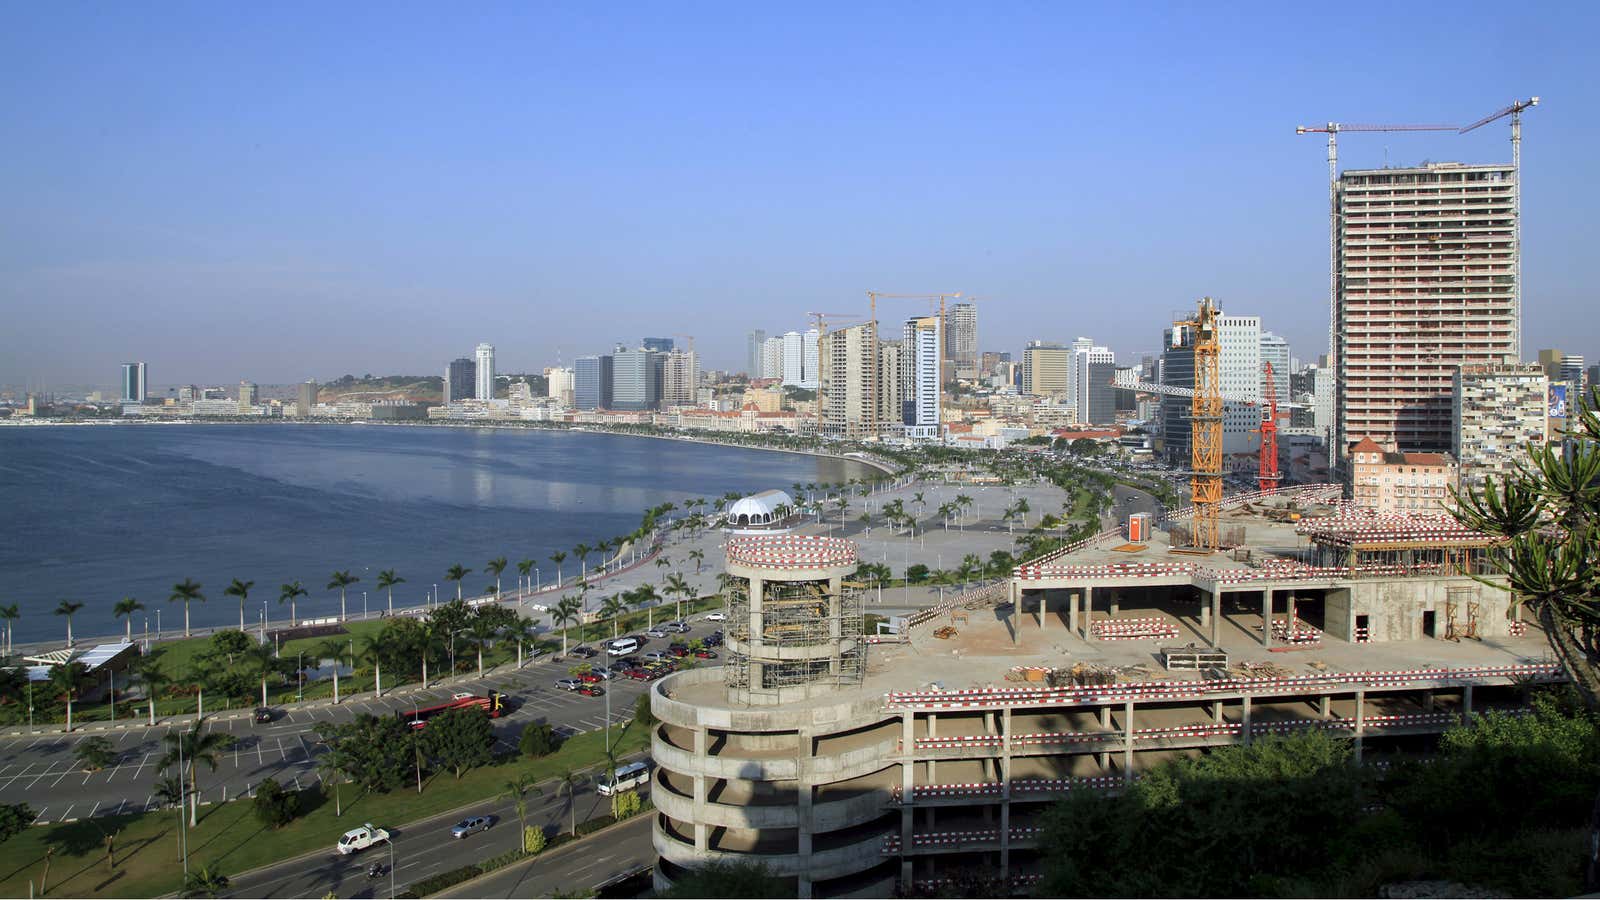 Luanda might be pretty but other parts of Angola are dealing with a health crisis.